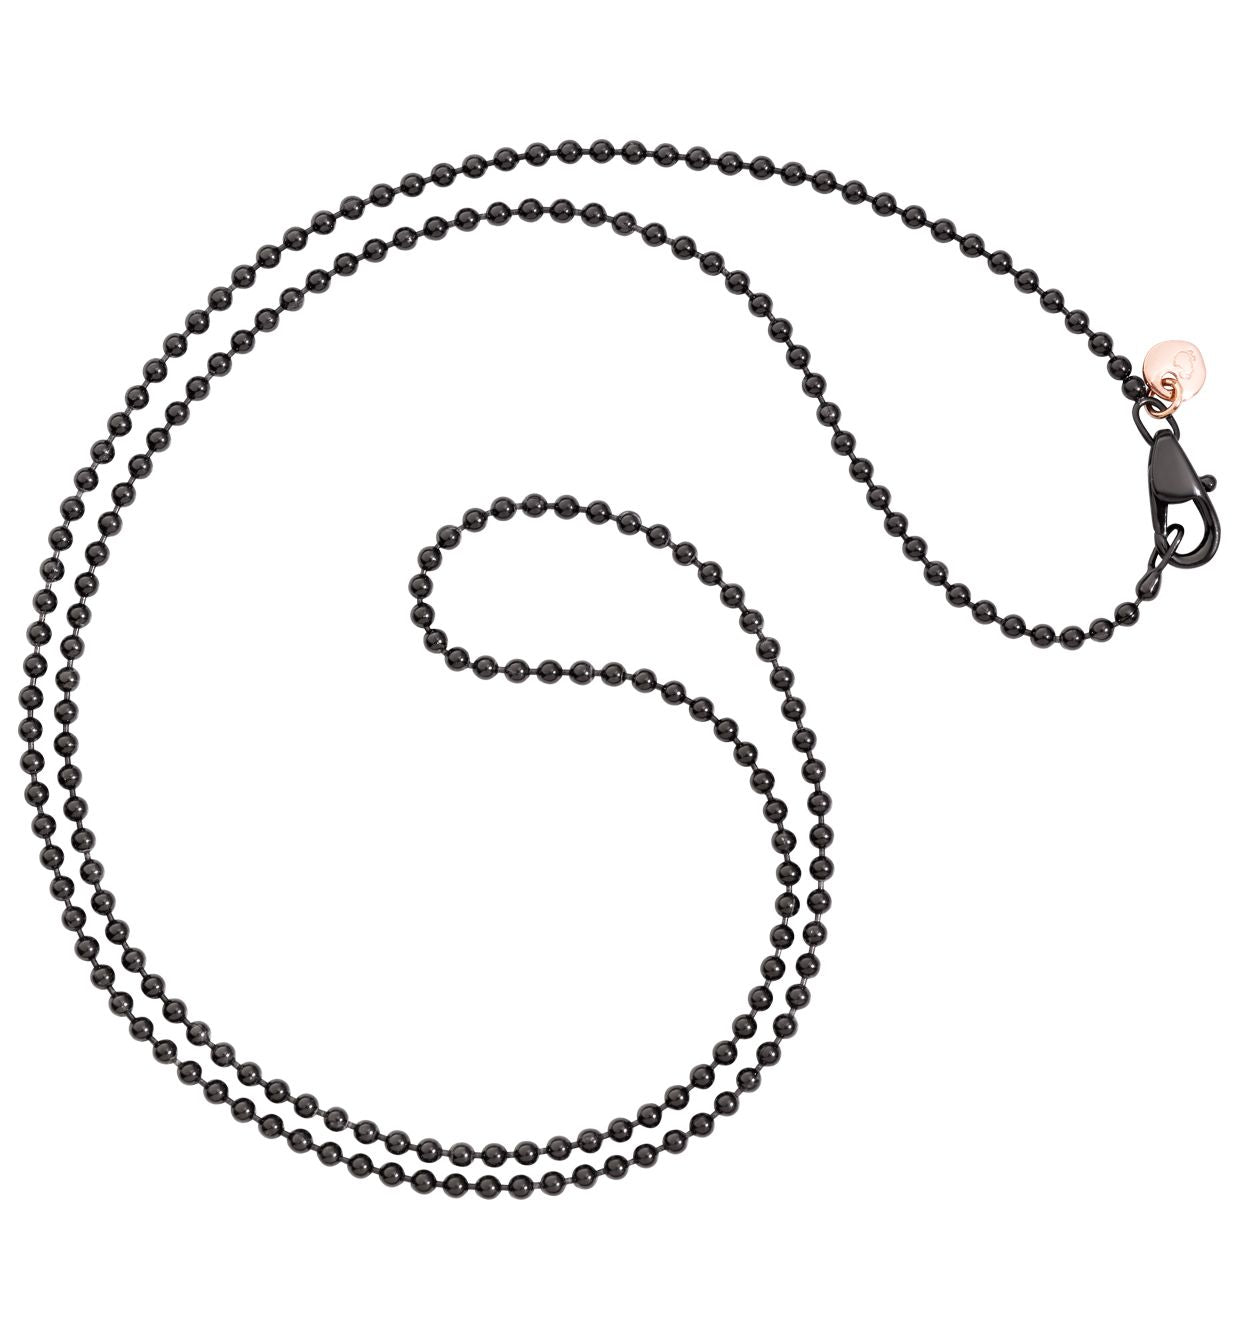 DoDo Bollicine Necklace in Steel and Black PVD with 9k Rose Gold Plauqette - Orsini Jewellers NZ